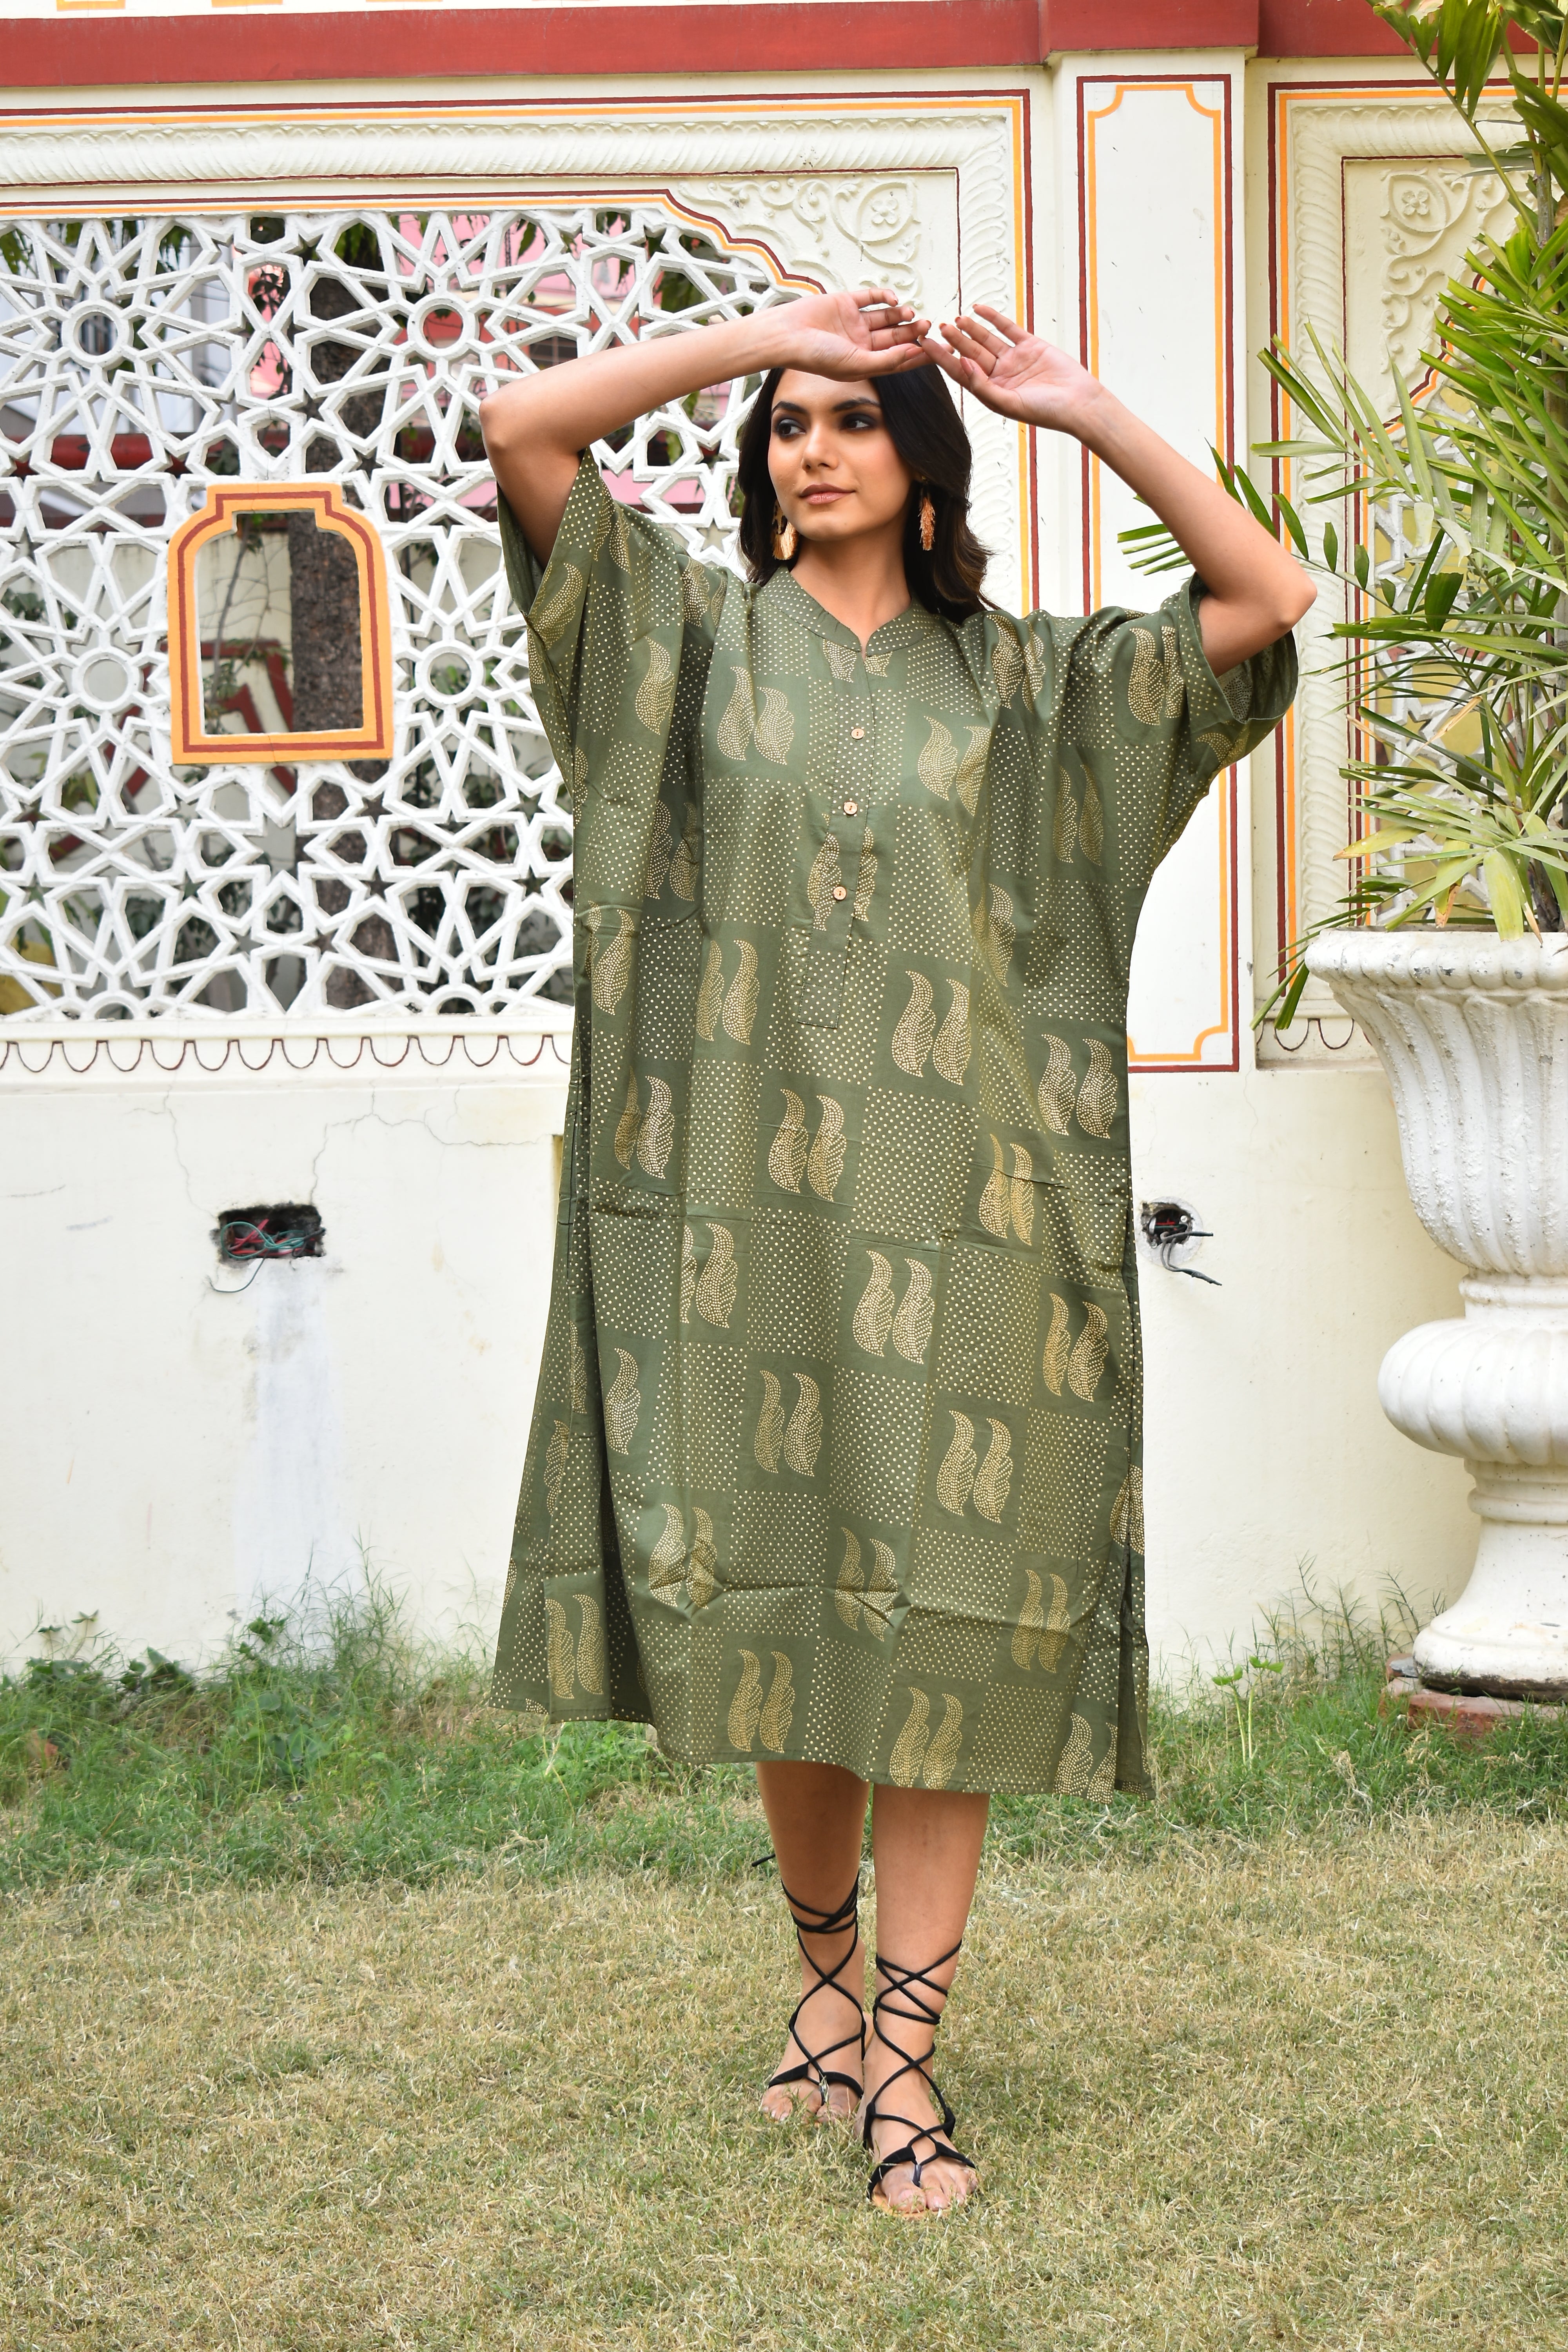 "Handmade cotton shirt dress in green and gold: Unique artisanal creation, perfect for standout style."